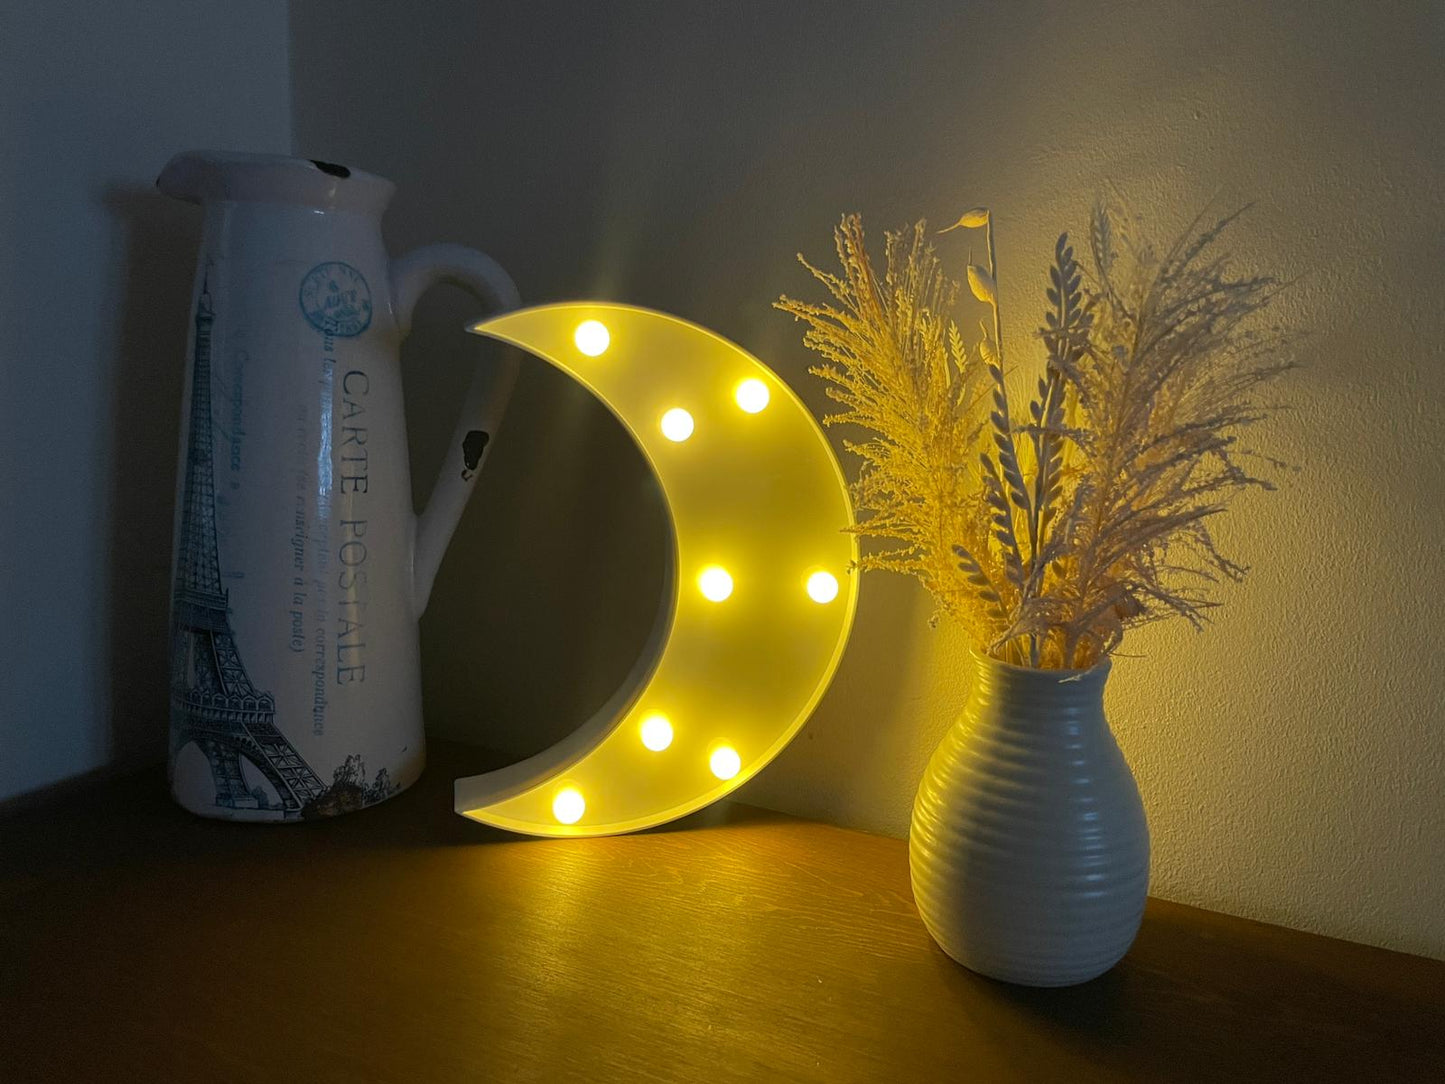 LED Moon Sign Light, Warm White LED Lamp For Living Room & Bedroom, Table & Wall Christmas Decoration for Kids & Adults - Battery Powered - White